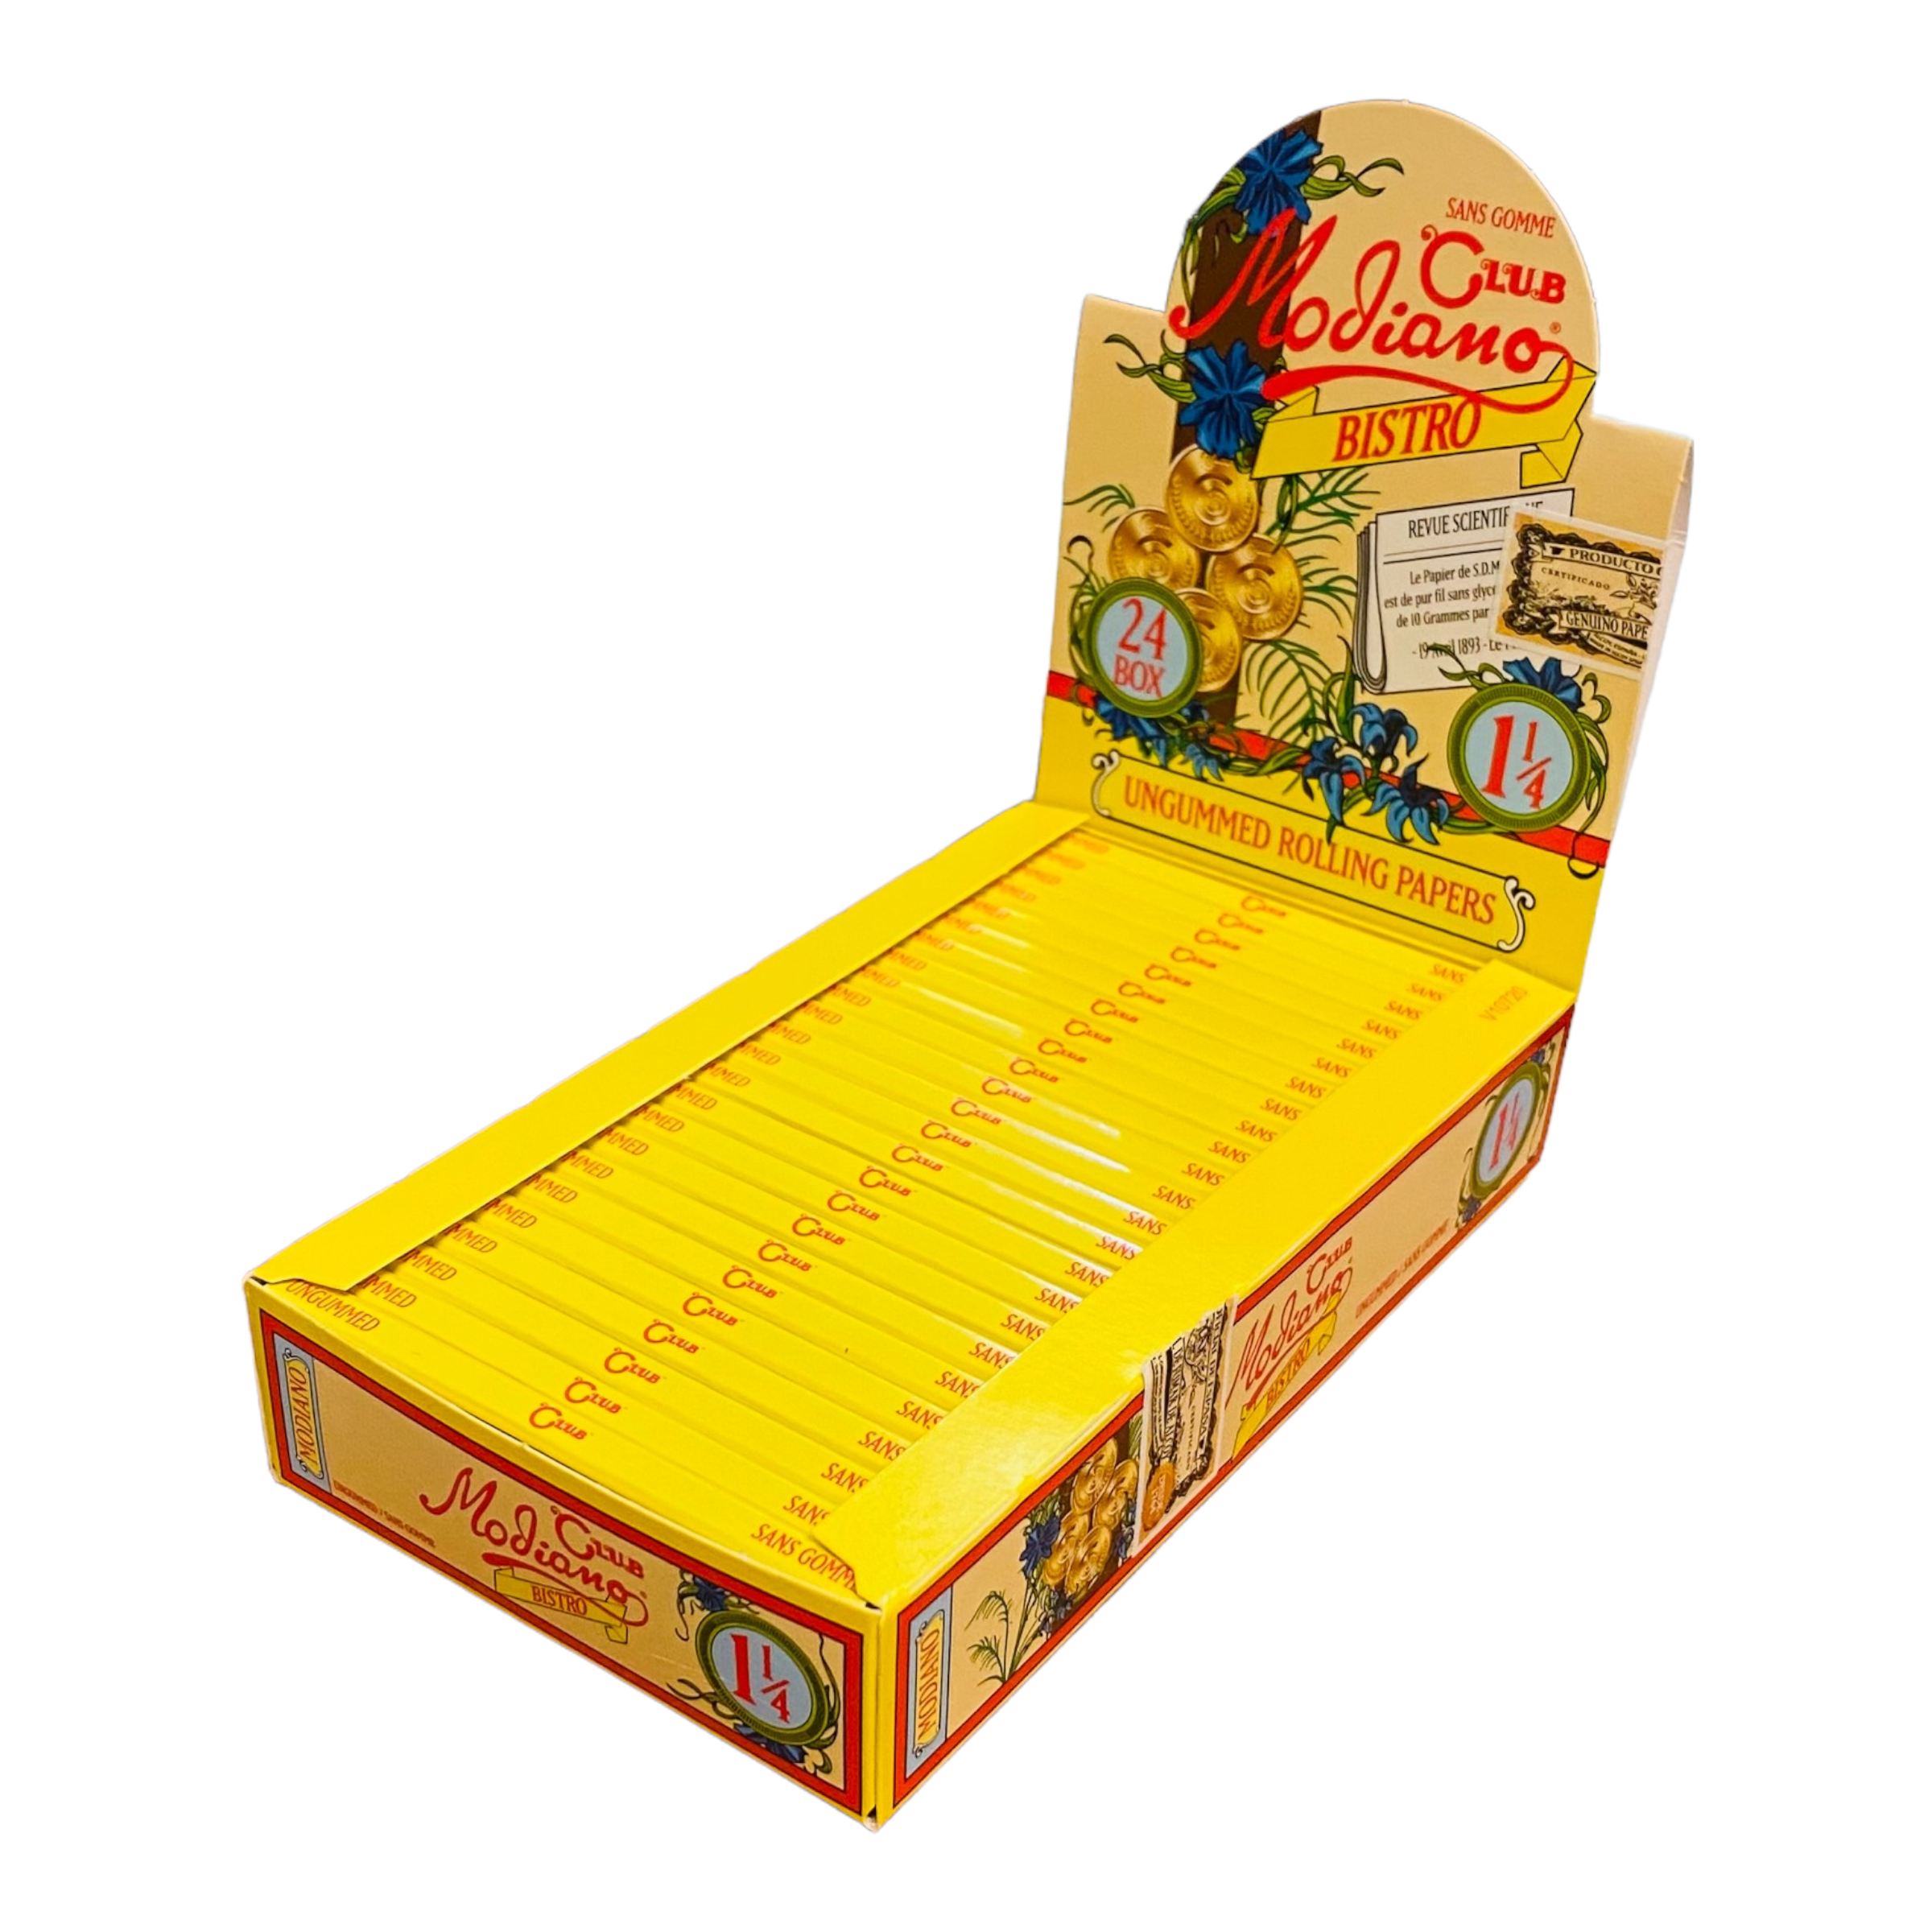 Club Modiano - BOX Of 1.25 UnGummed Papers - 24 Pack Box